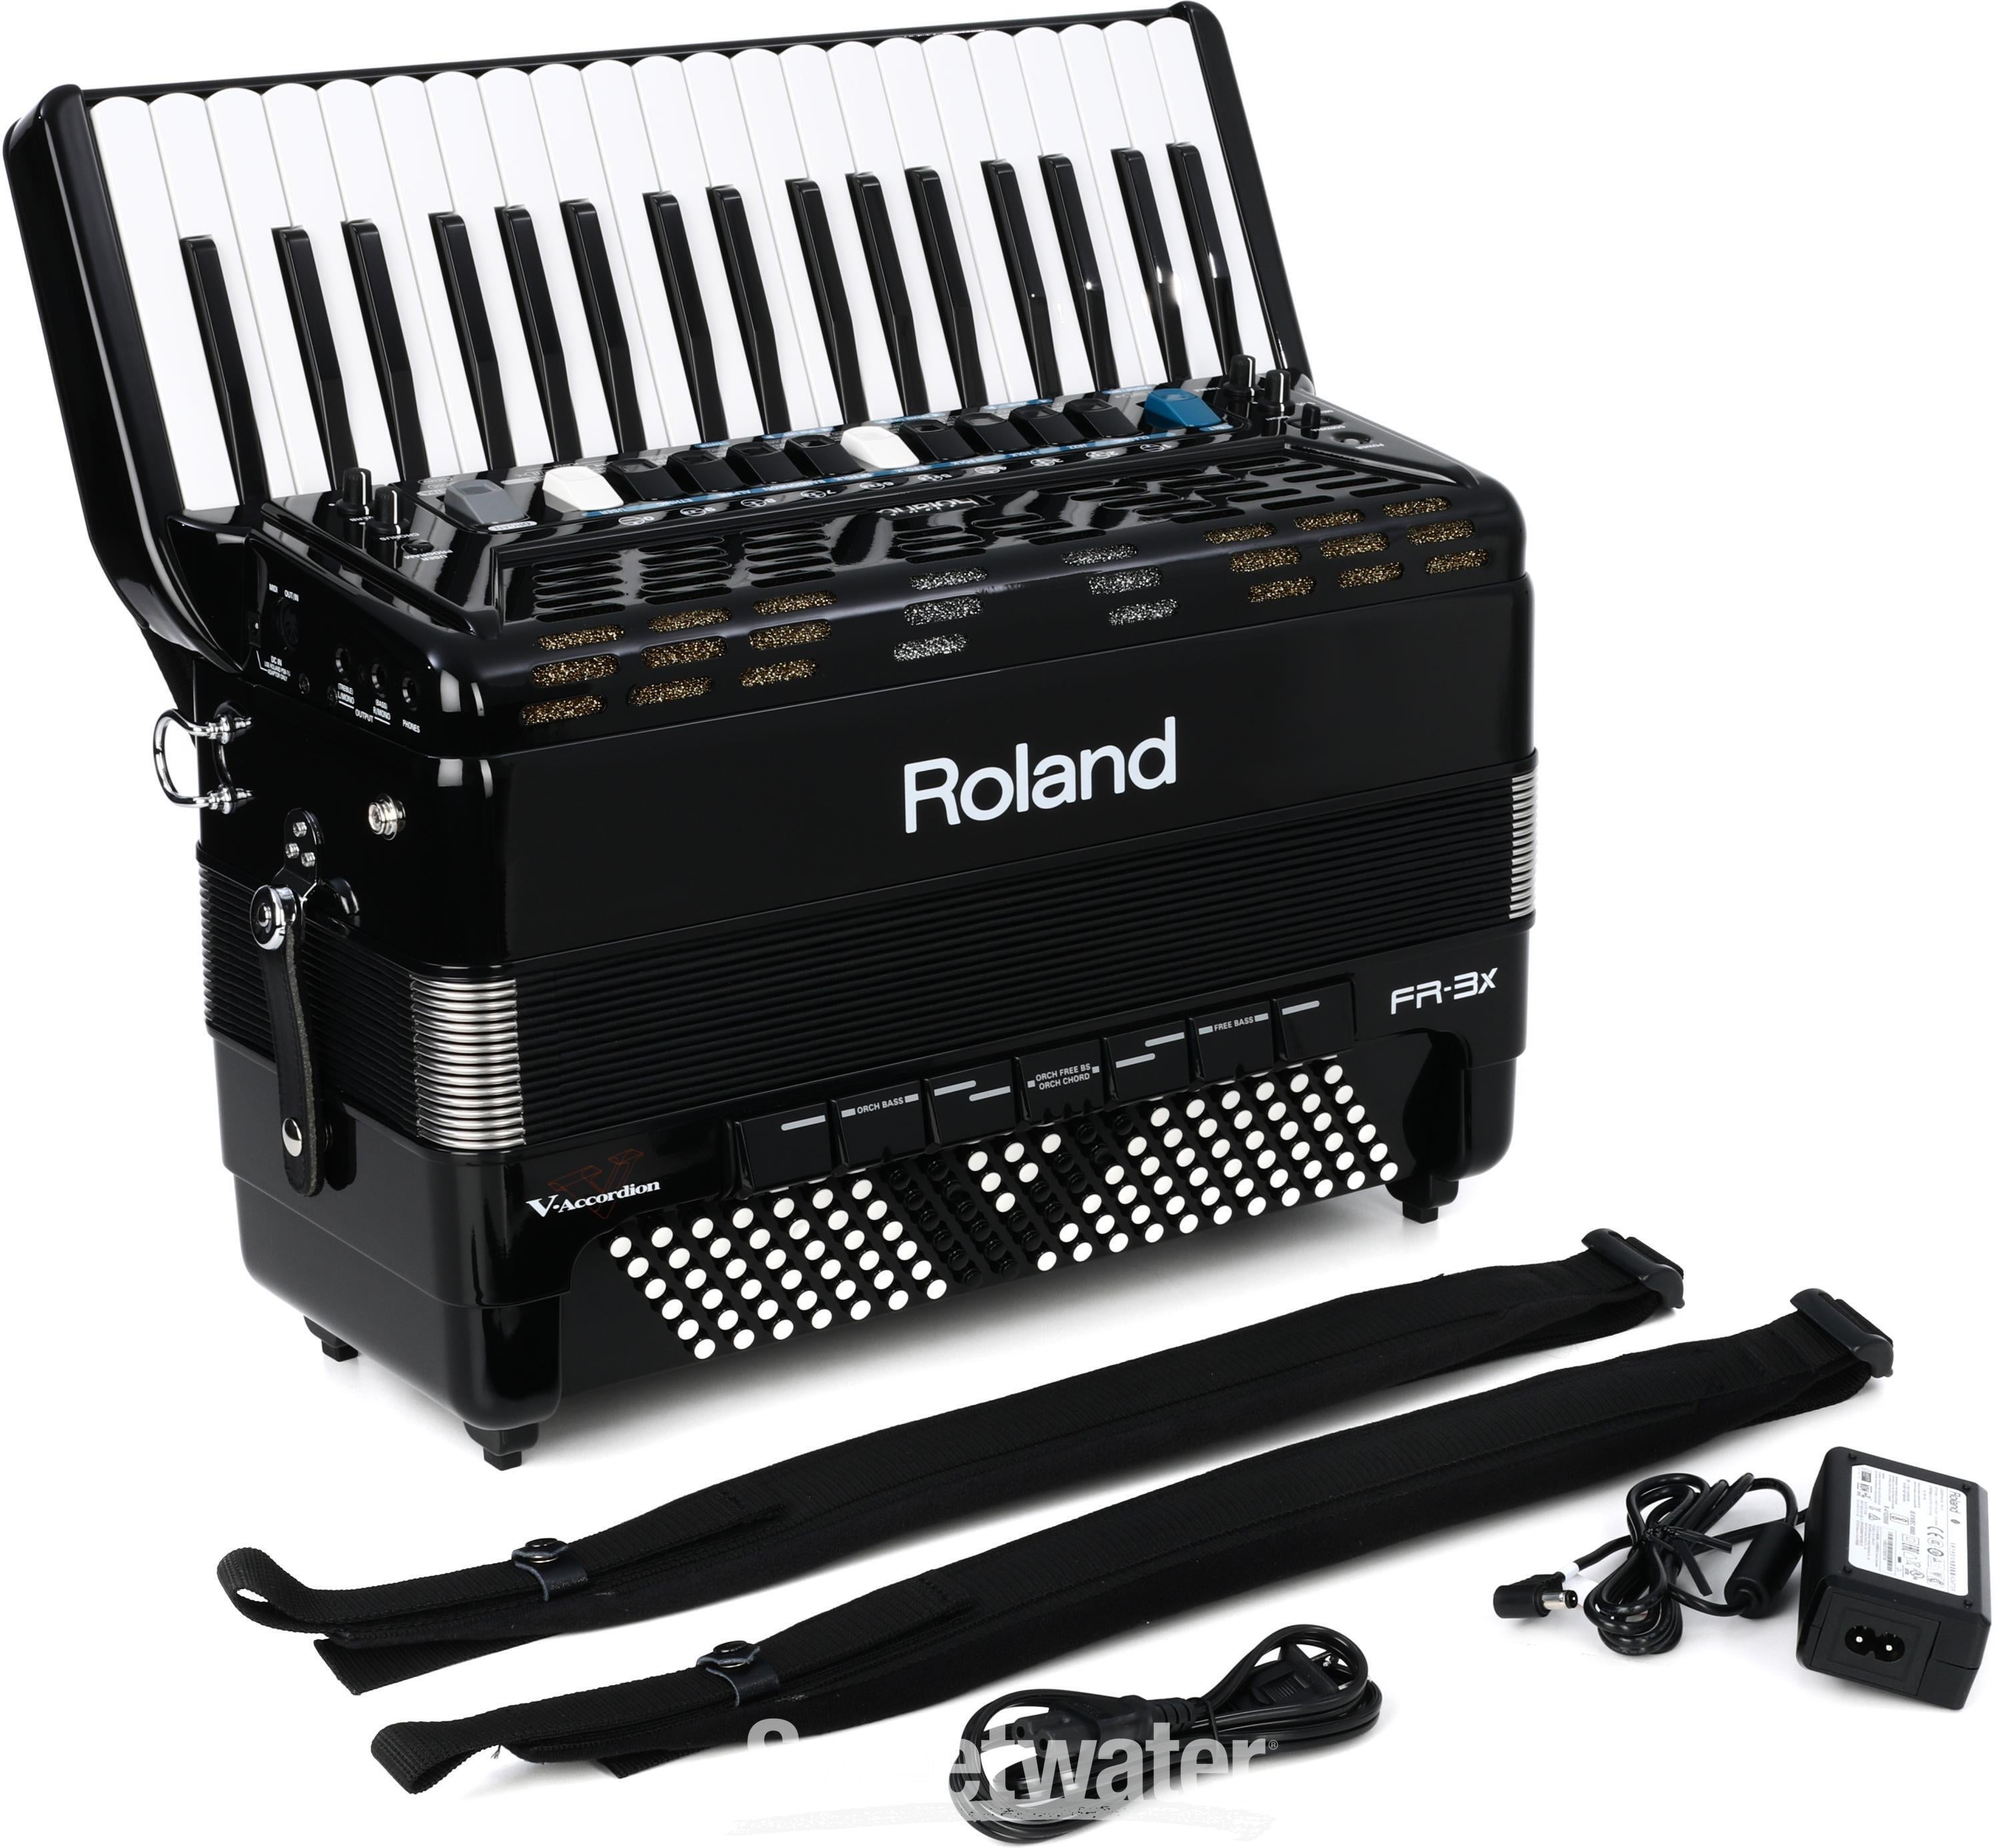 Roland FR-3x Piano-type V-Accordion - Black | Sweetwater